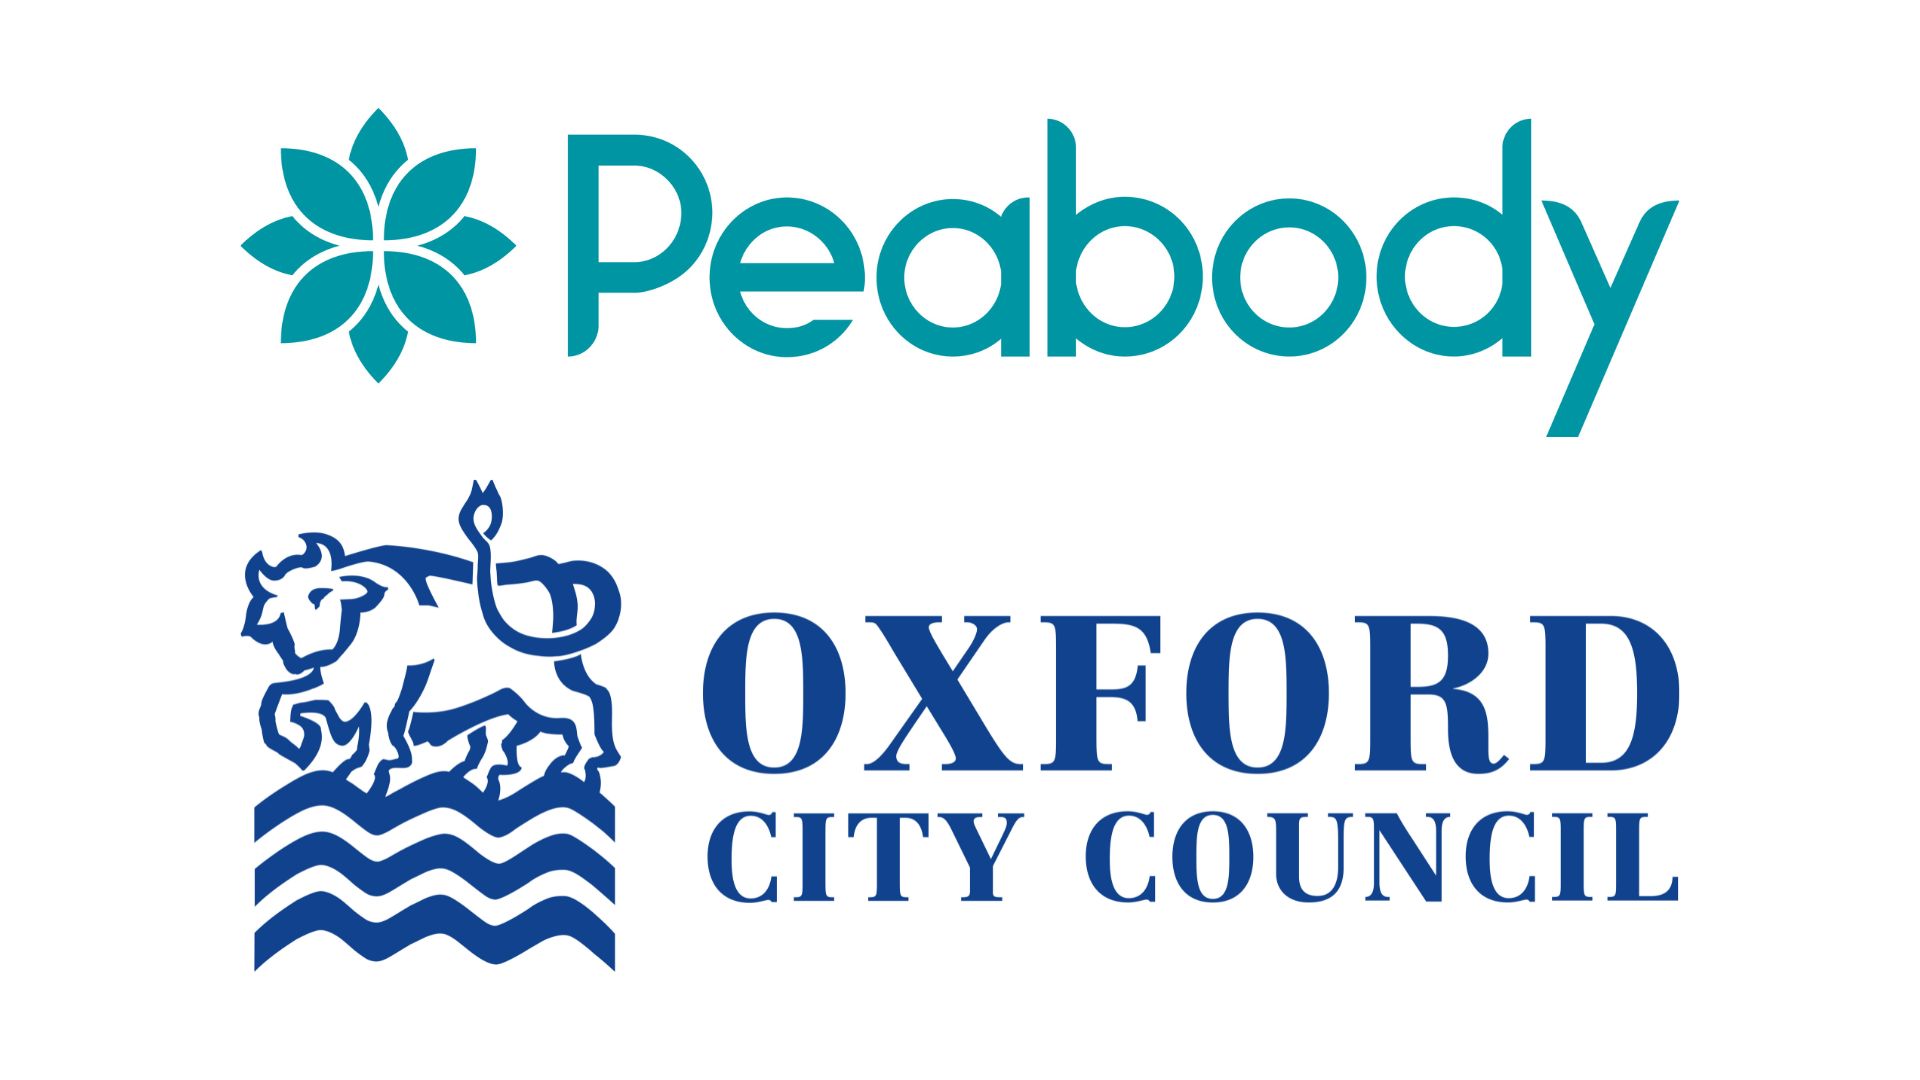 Peabody and Oxford City Council logos